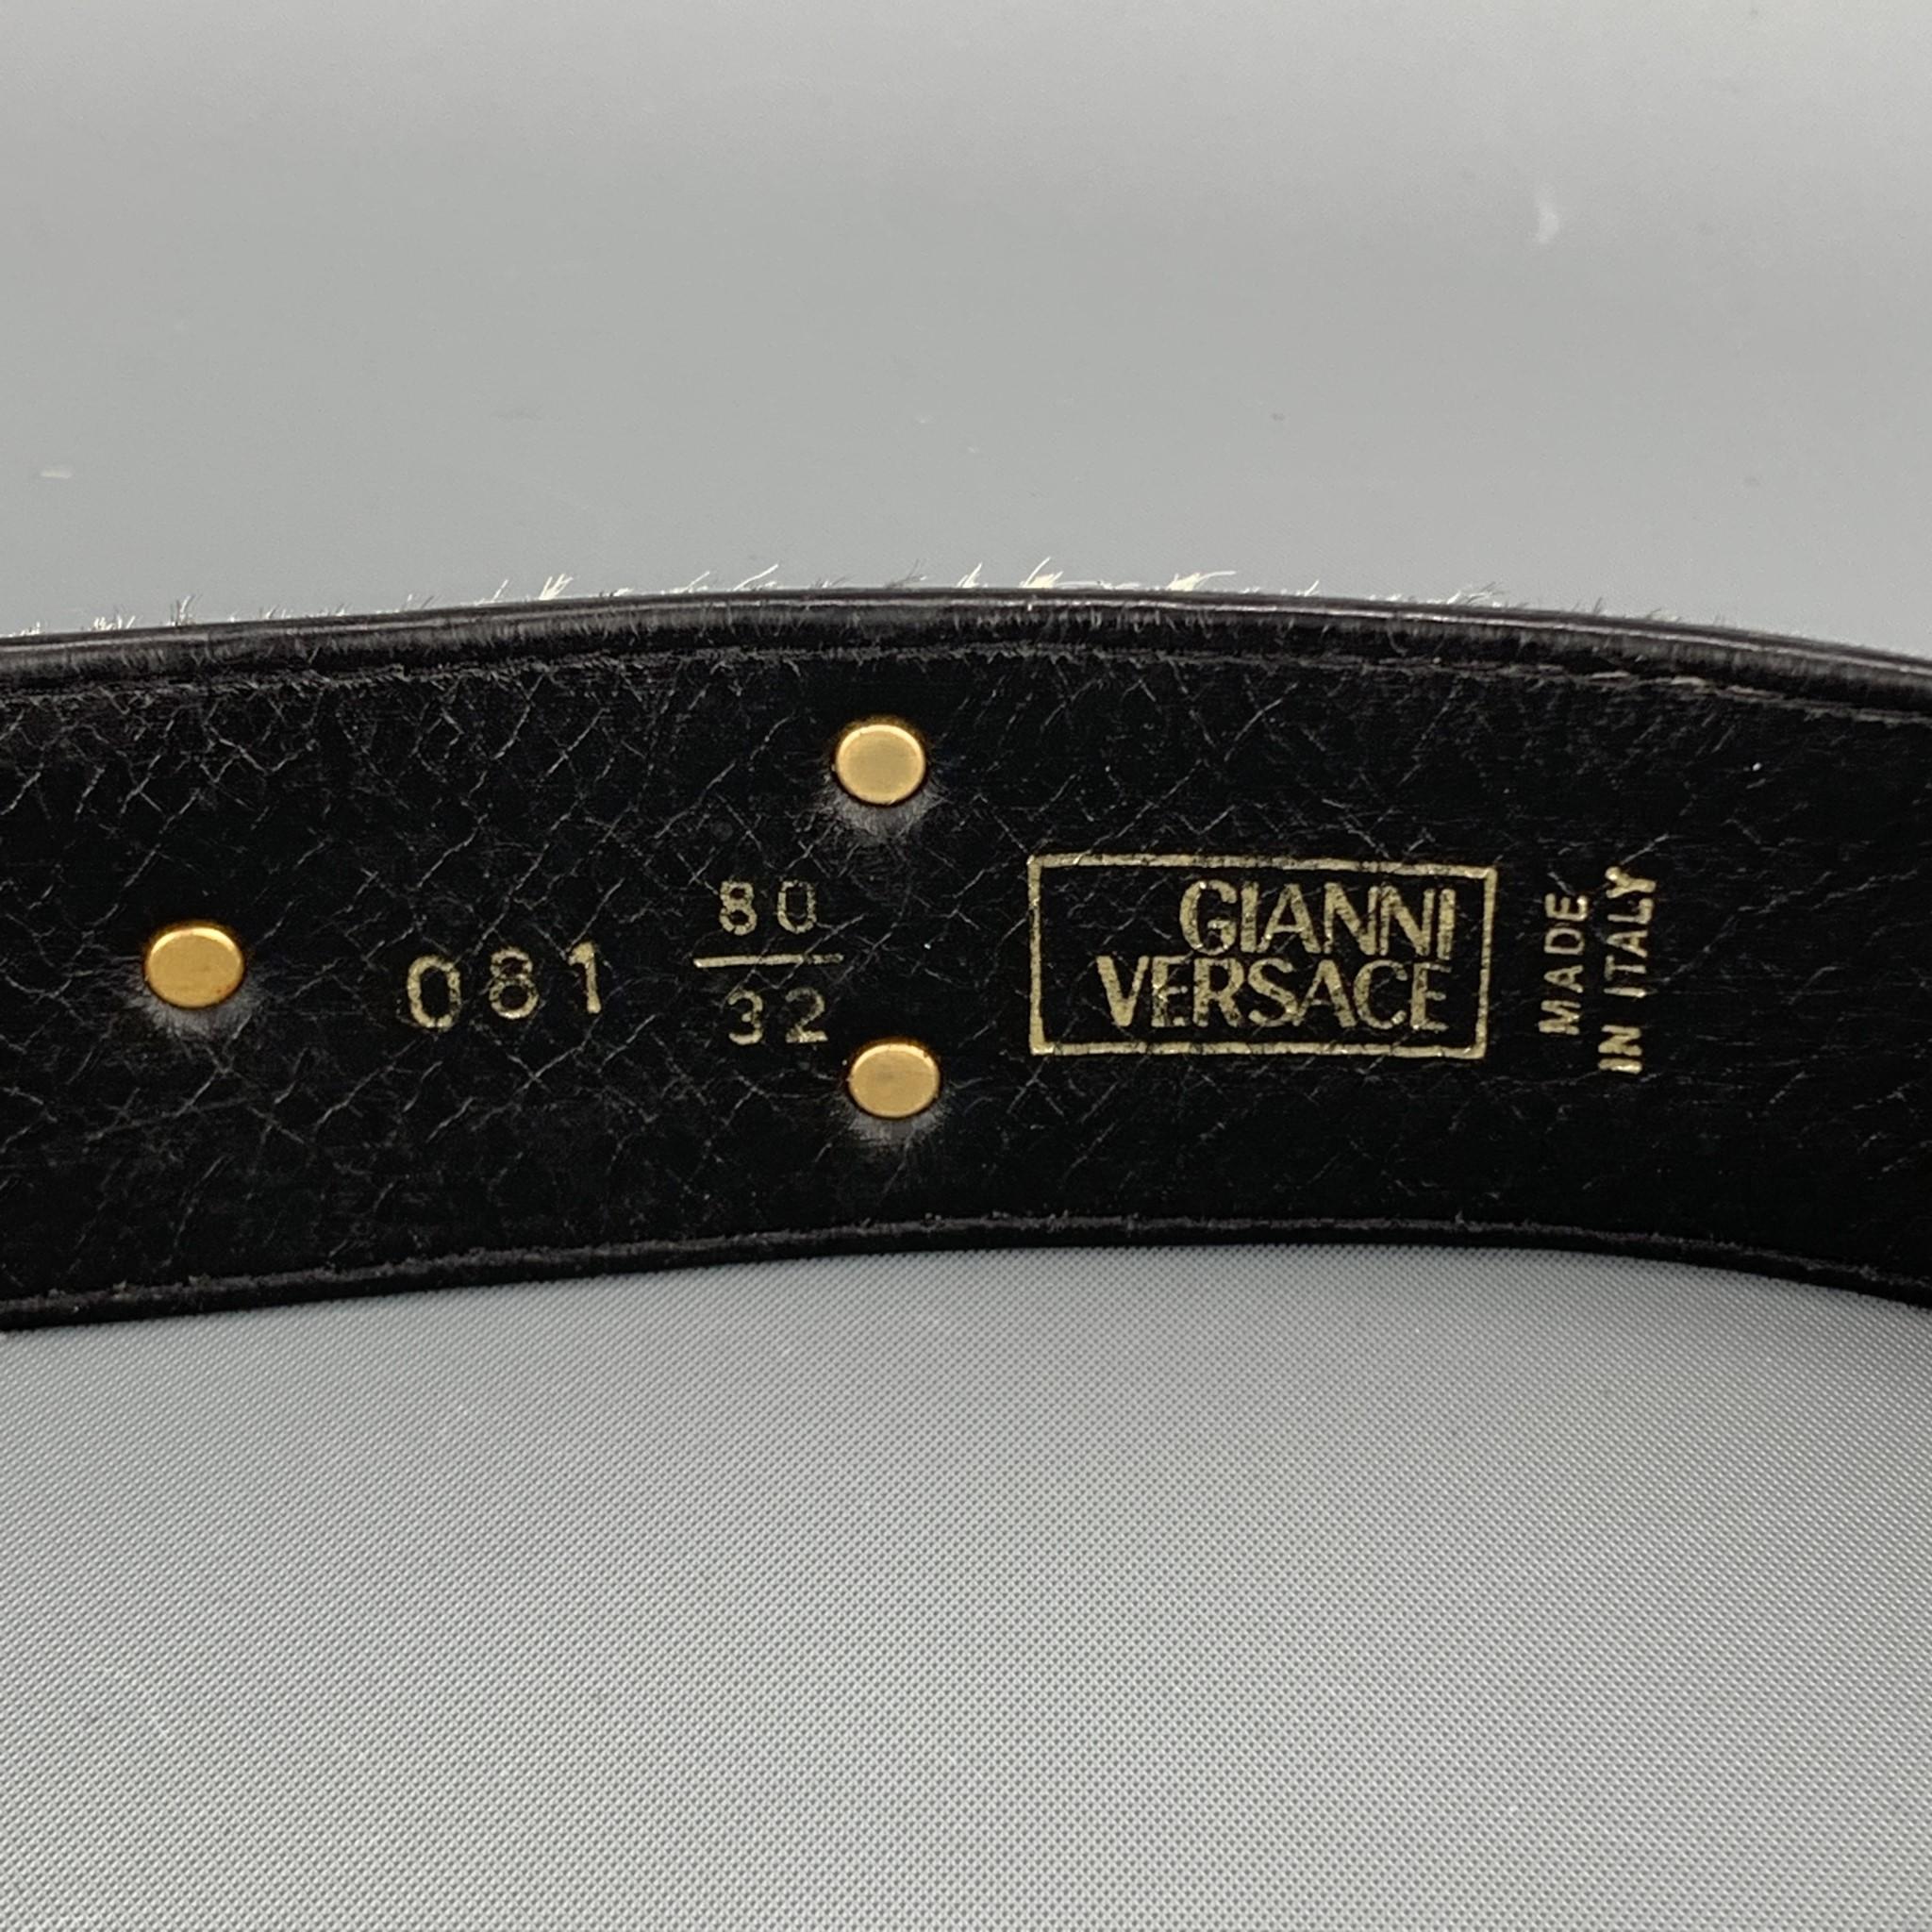 GIANNI VERSACE Studded Size 32 Beige & Brown Leather Pony Hair Belt 3